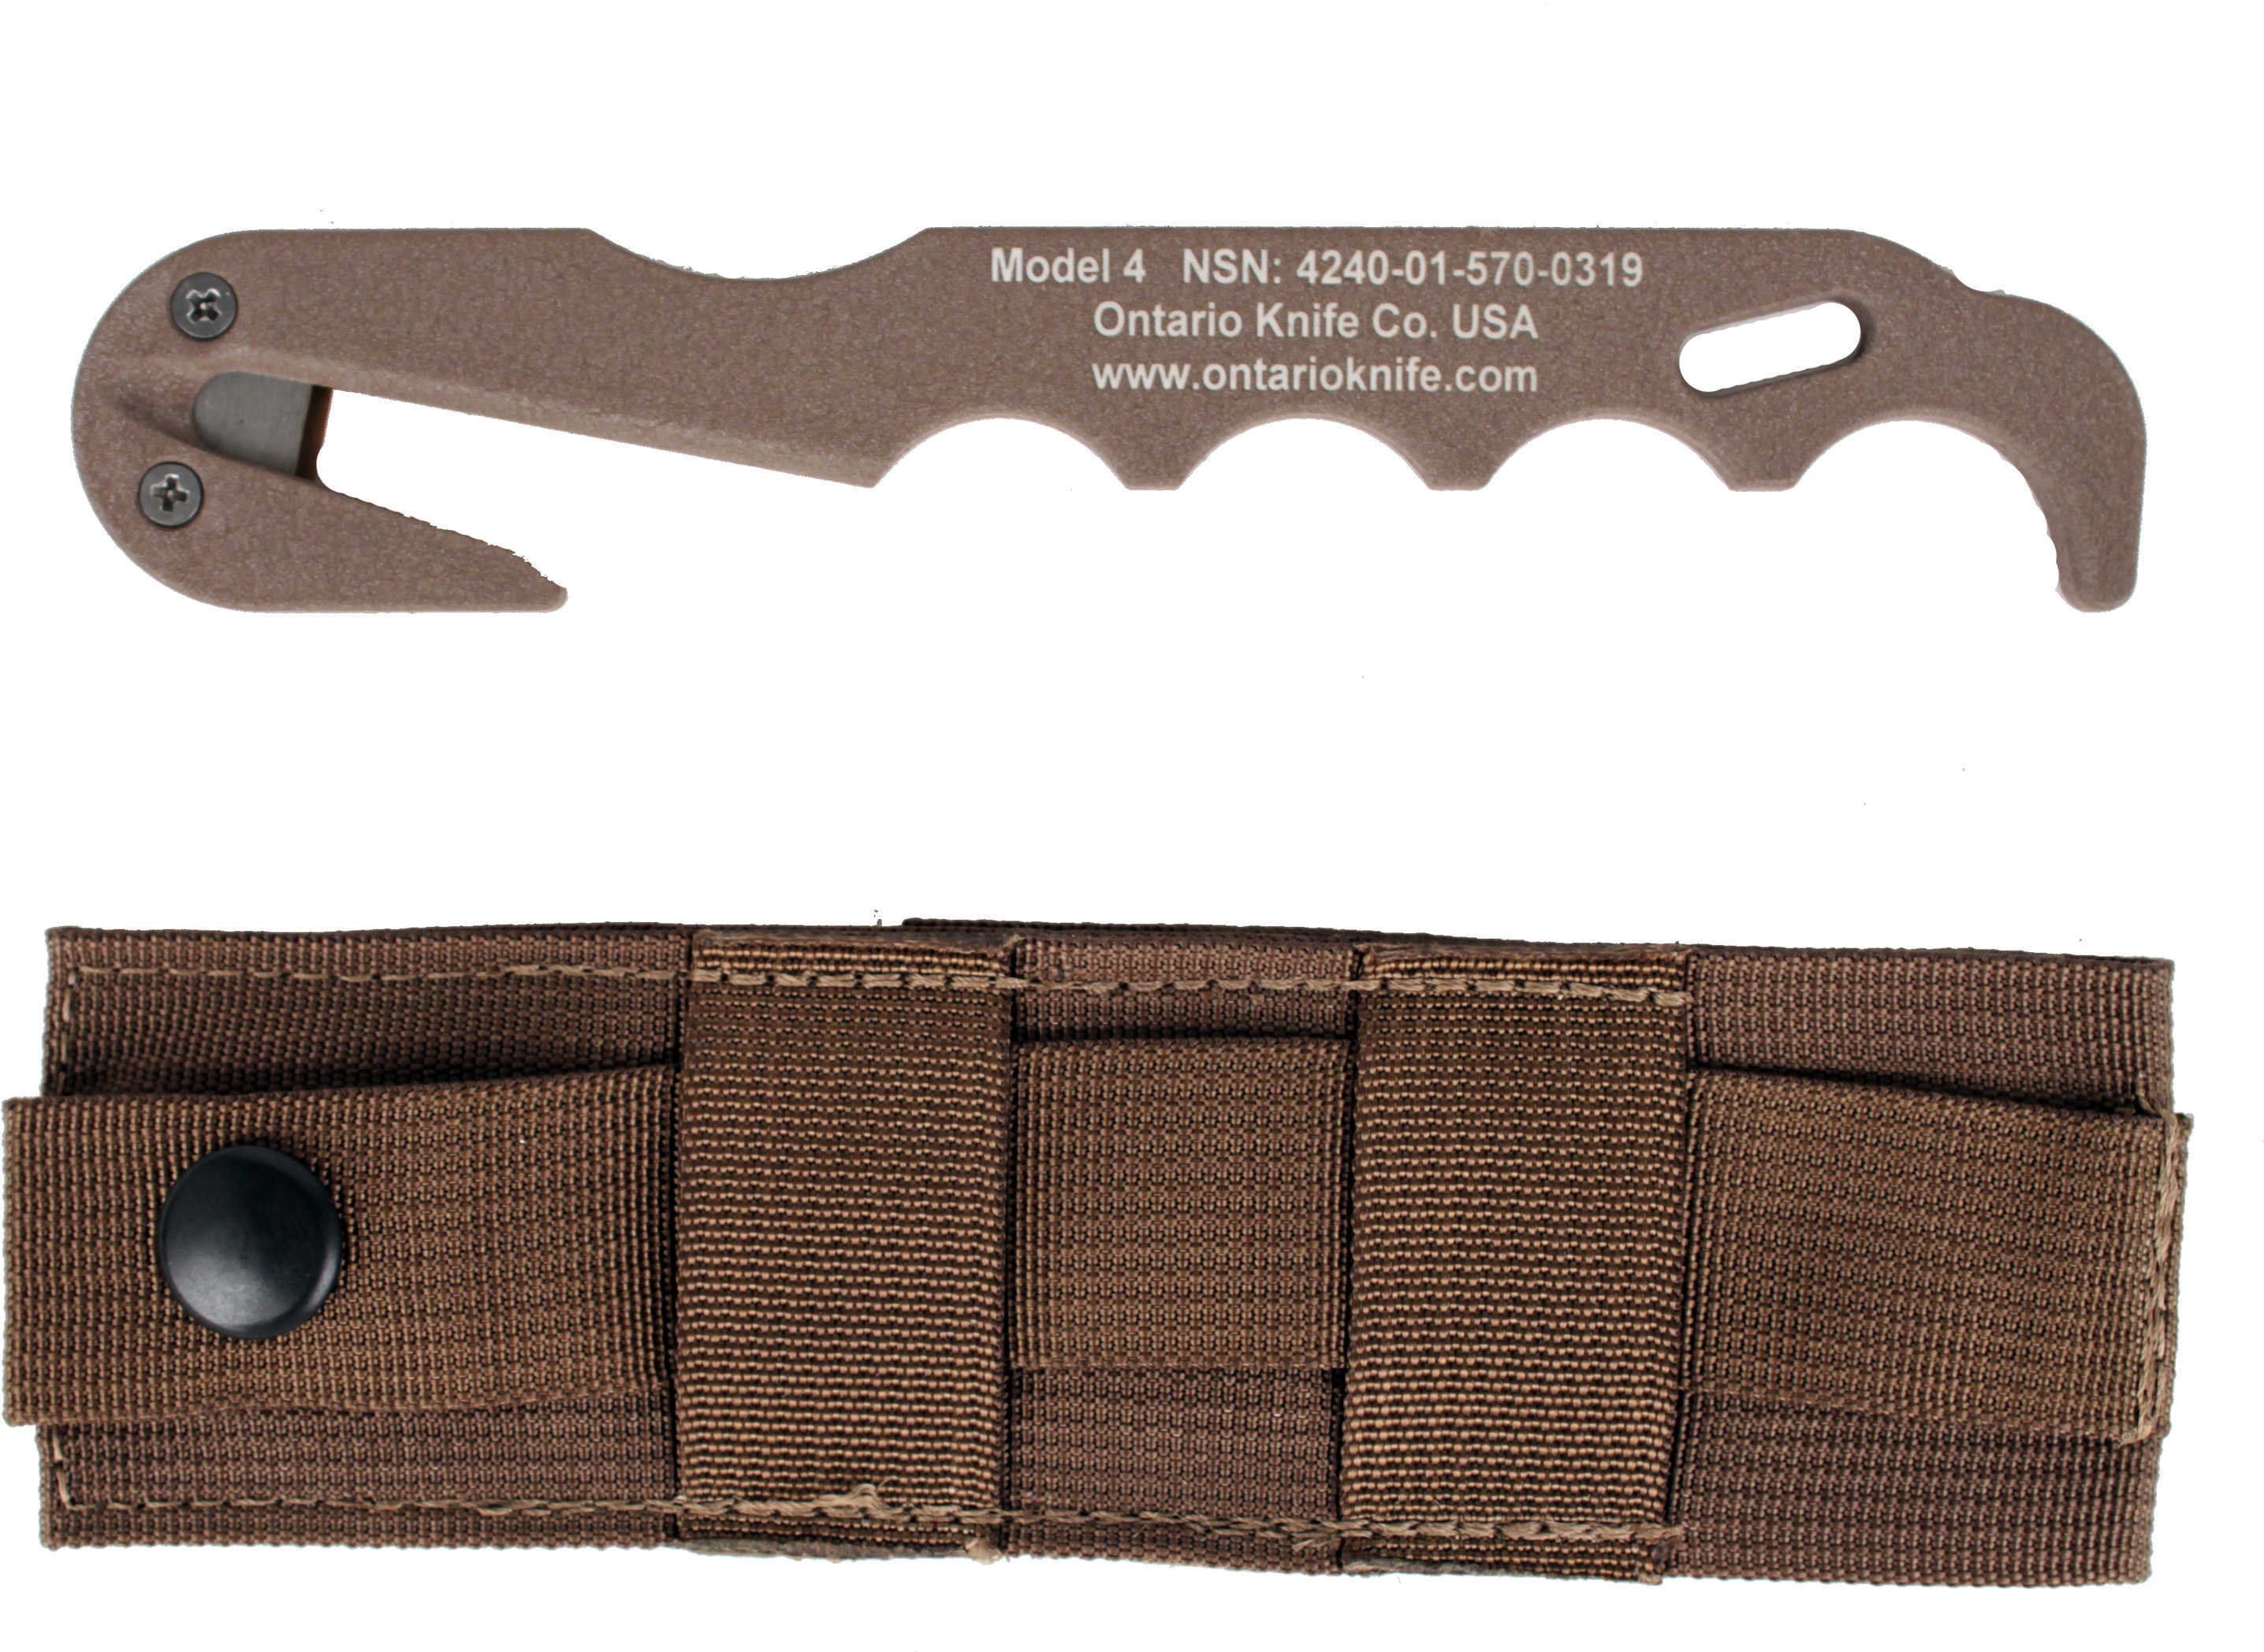 Ontario Knife Co Model 4 Cb Strap Cutter/Rescue Tool